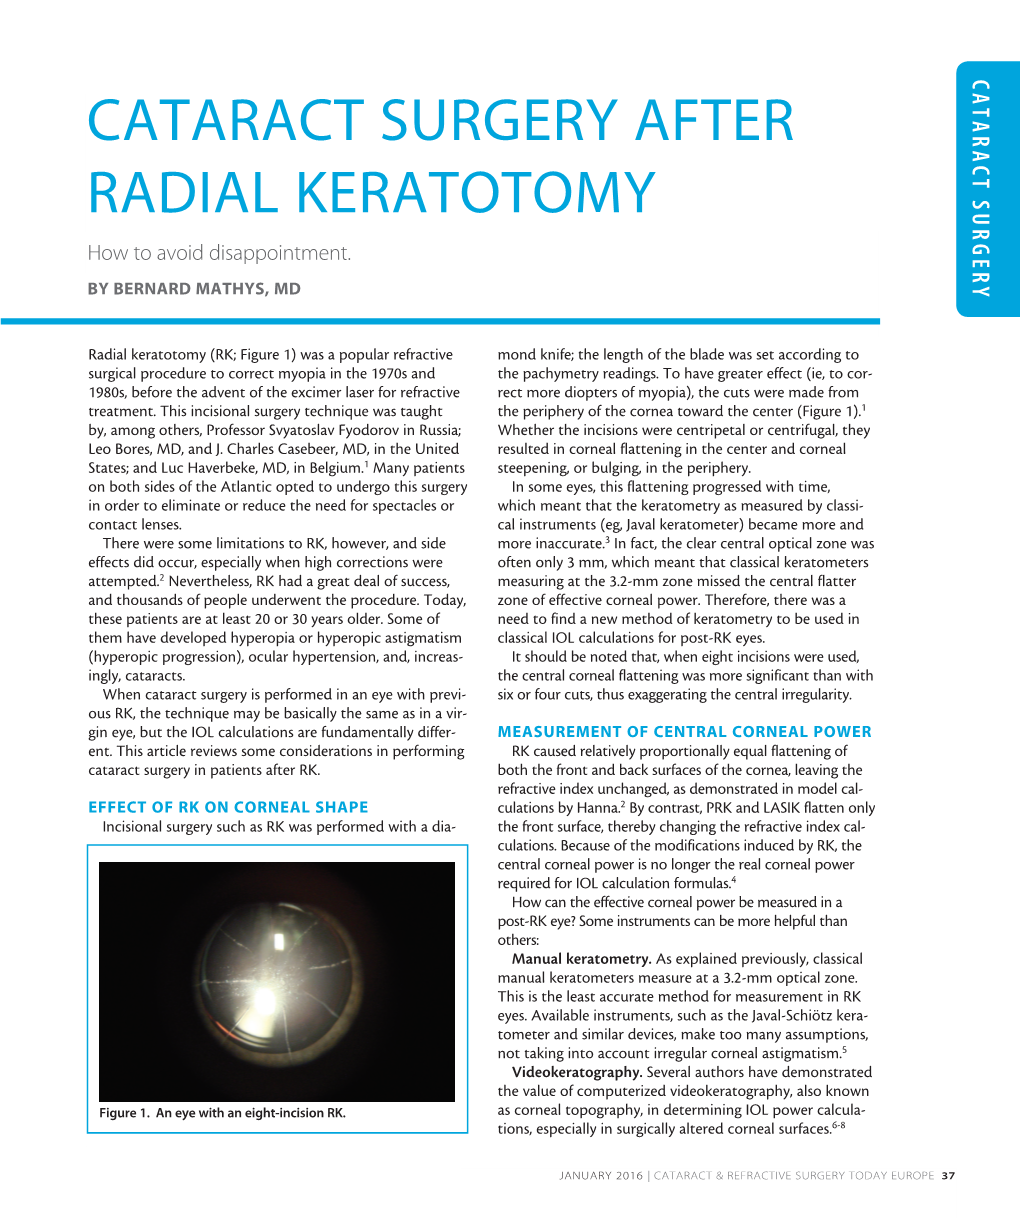 CATARACT SURGERY AFTER RADIAL KERATOTOMY How to Avoid Disappointment